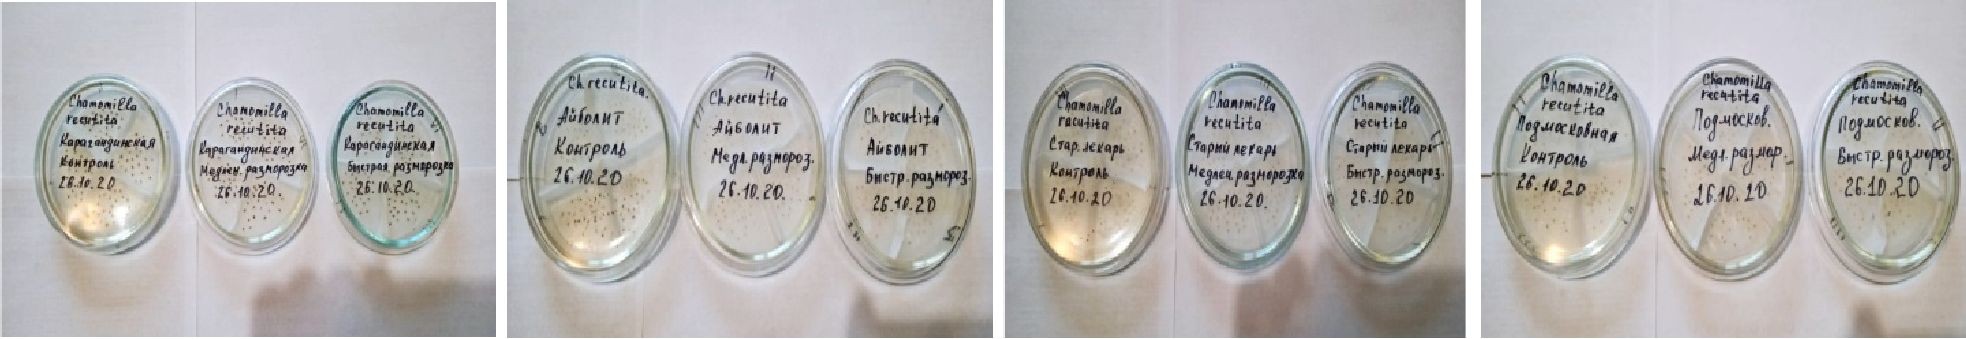 Assessment of the effect of long-term seed storage on the viability of Matricaria chamomilla seeds after cryopreservation